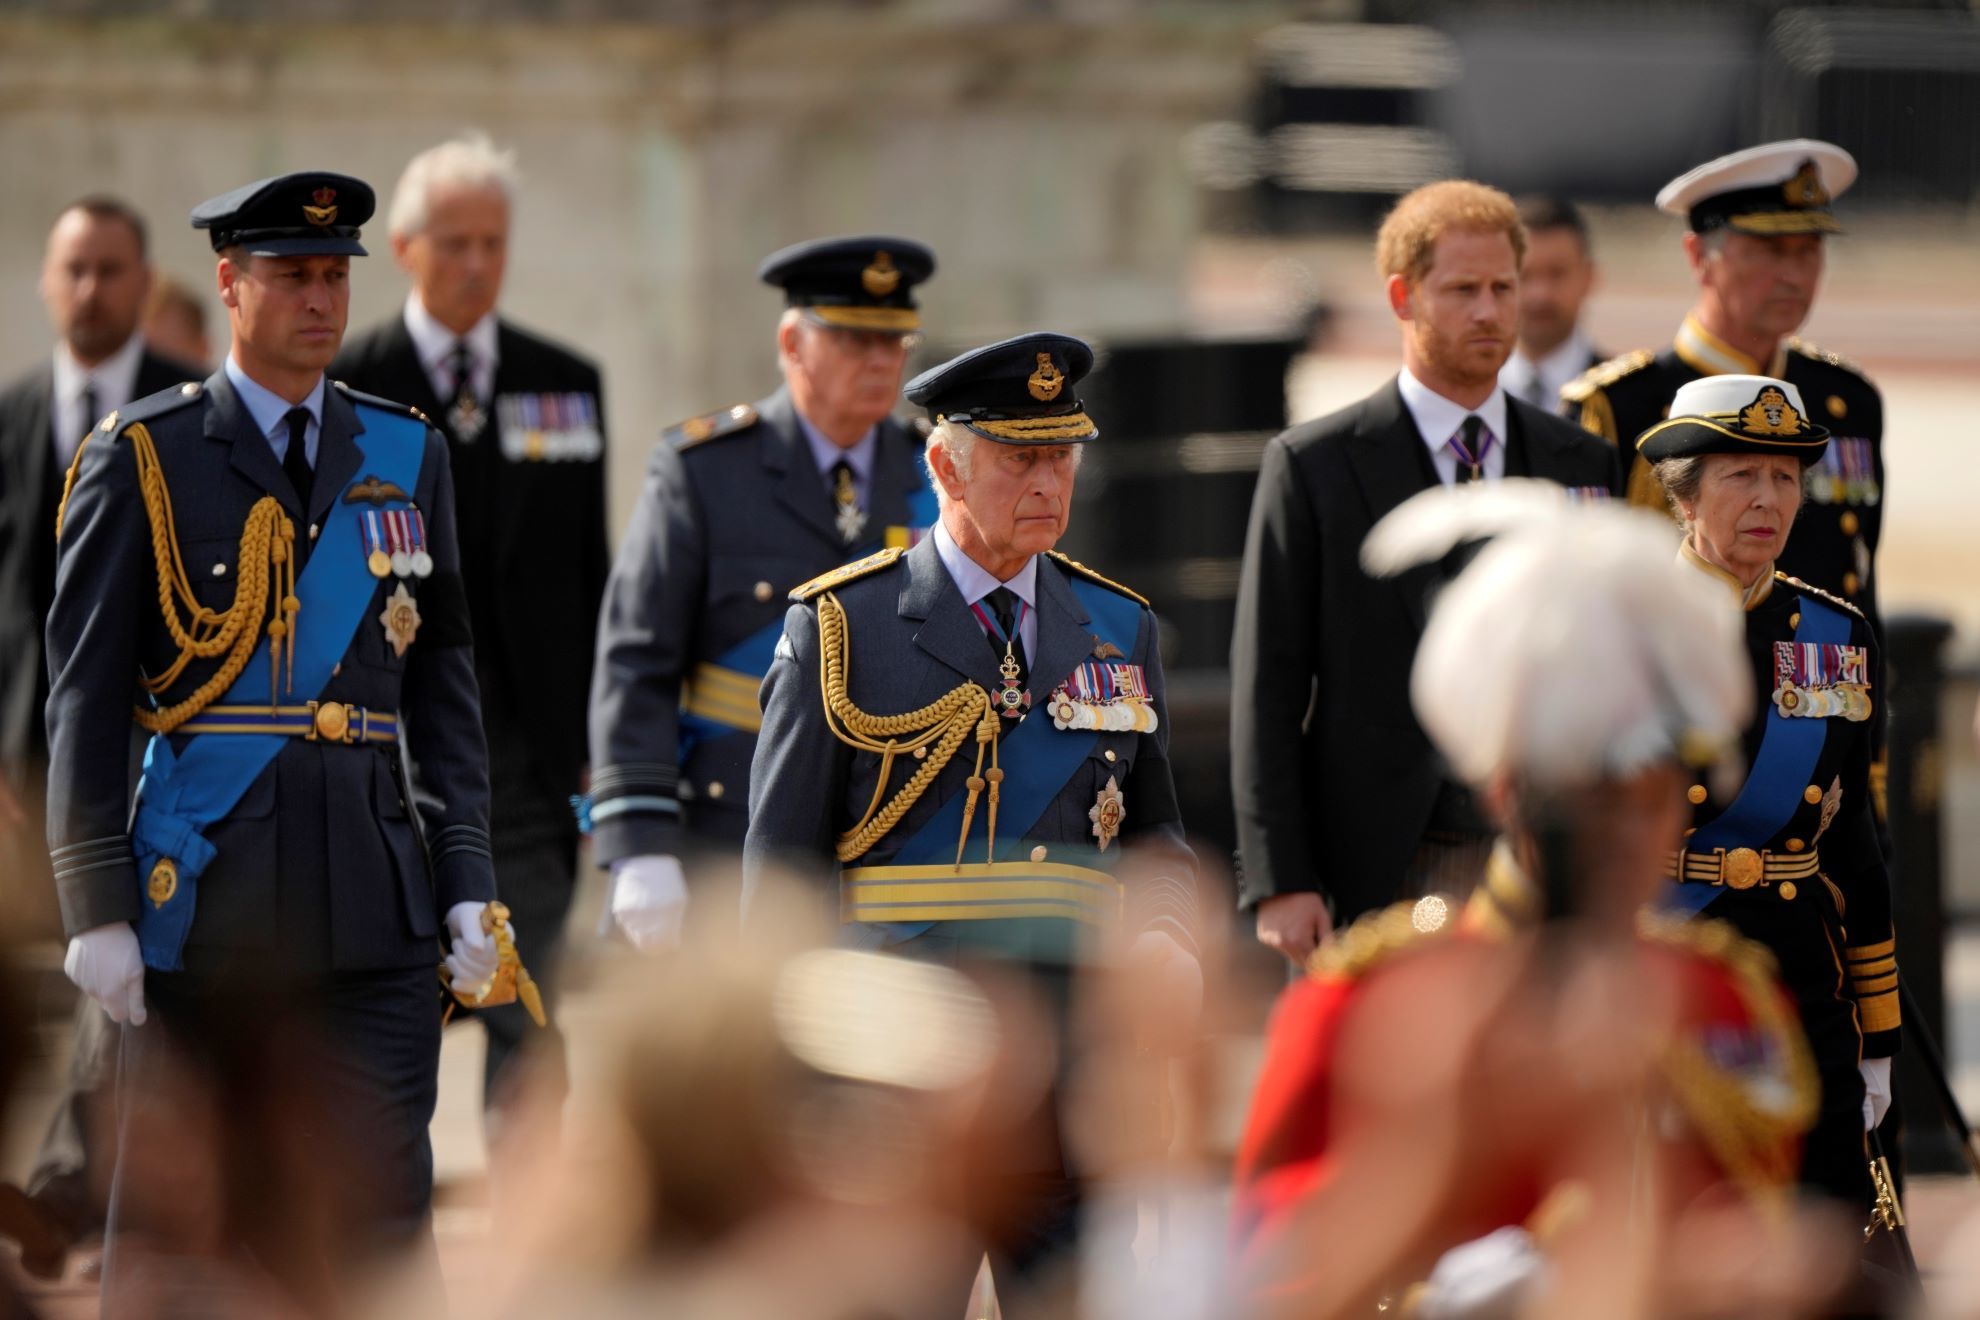 King Charles III and other members of Royal family follow the coffin of Queen Elizabeth II.